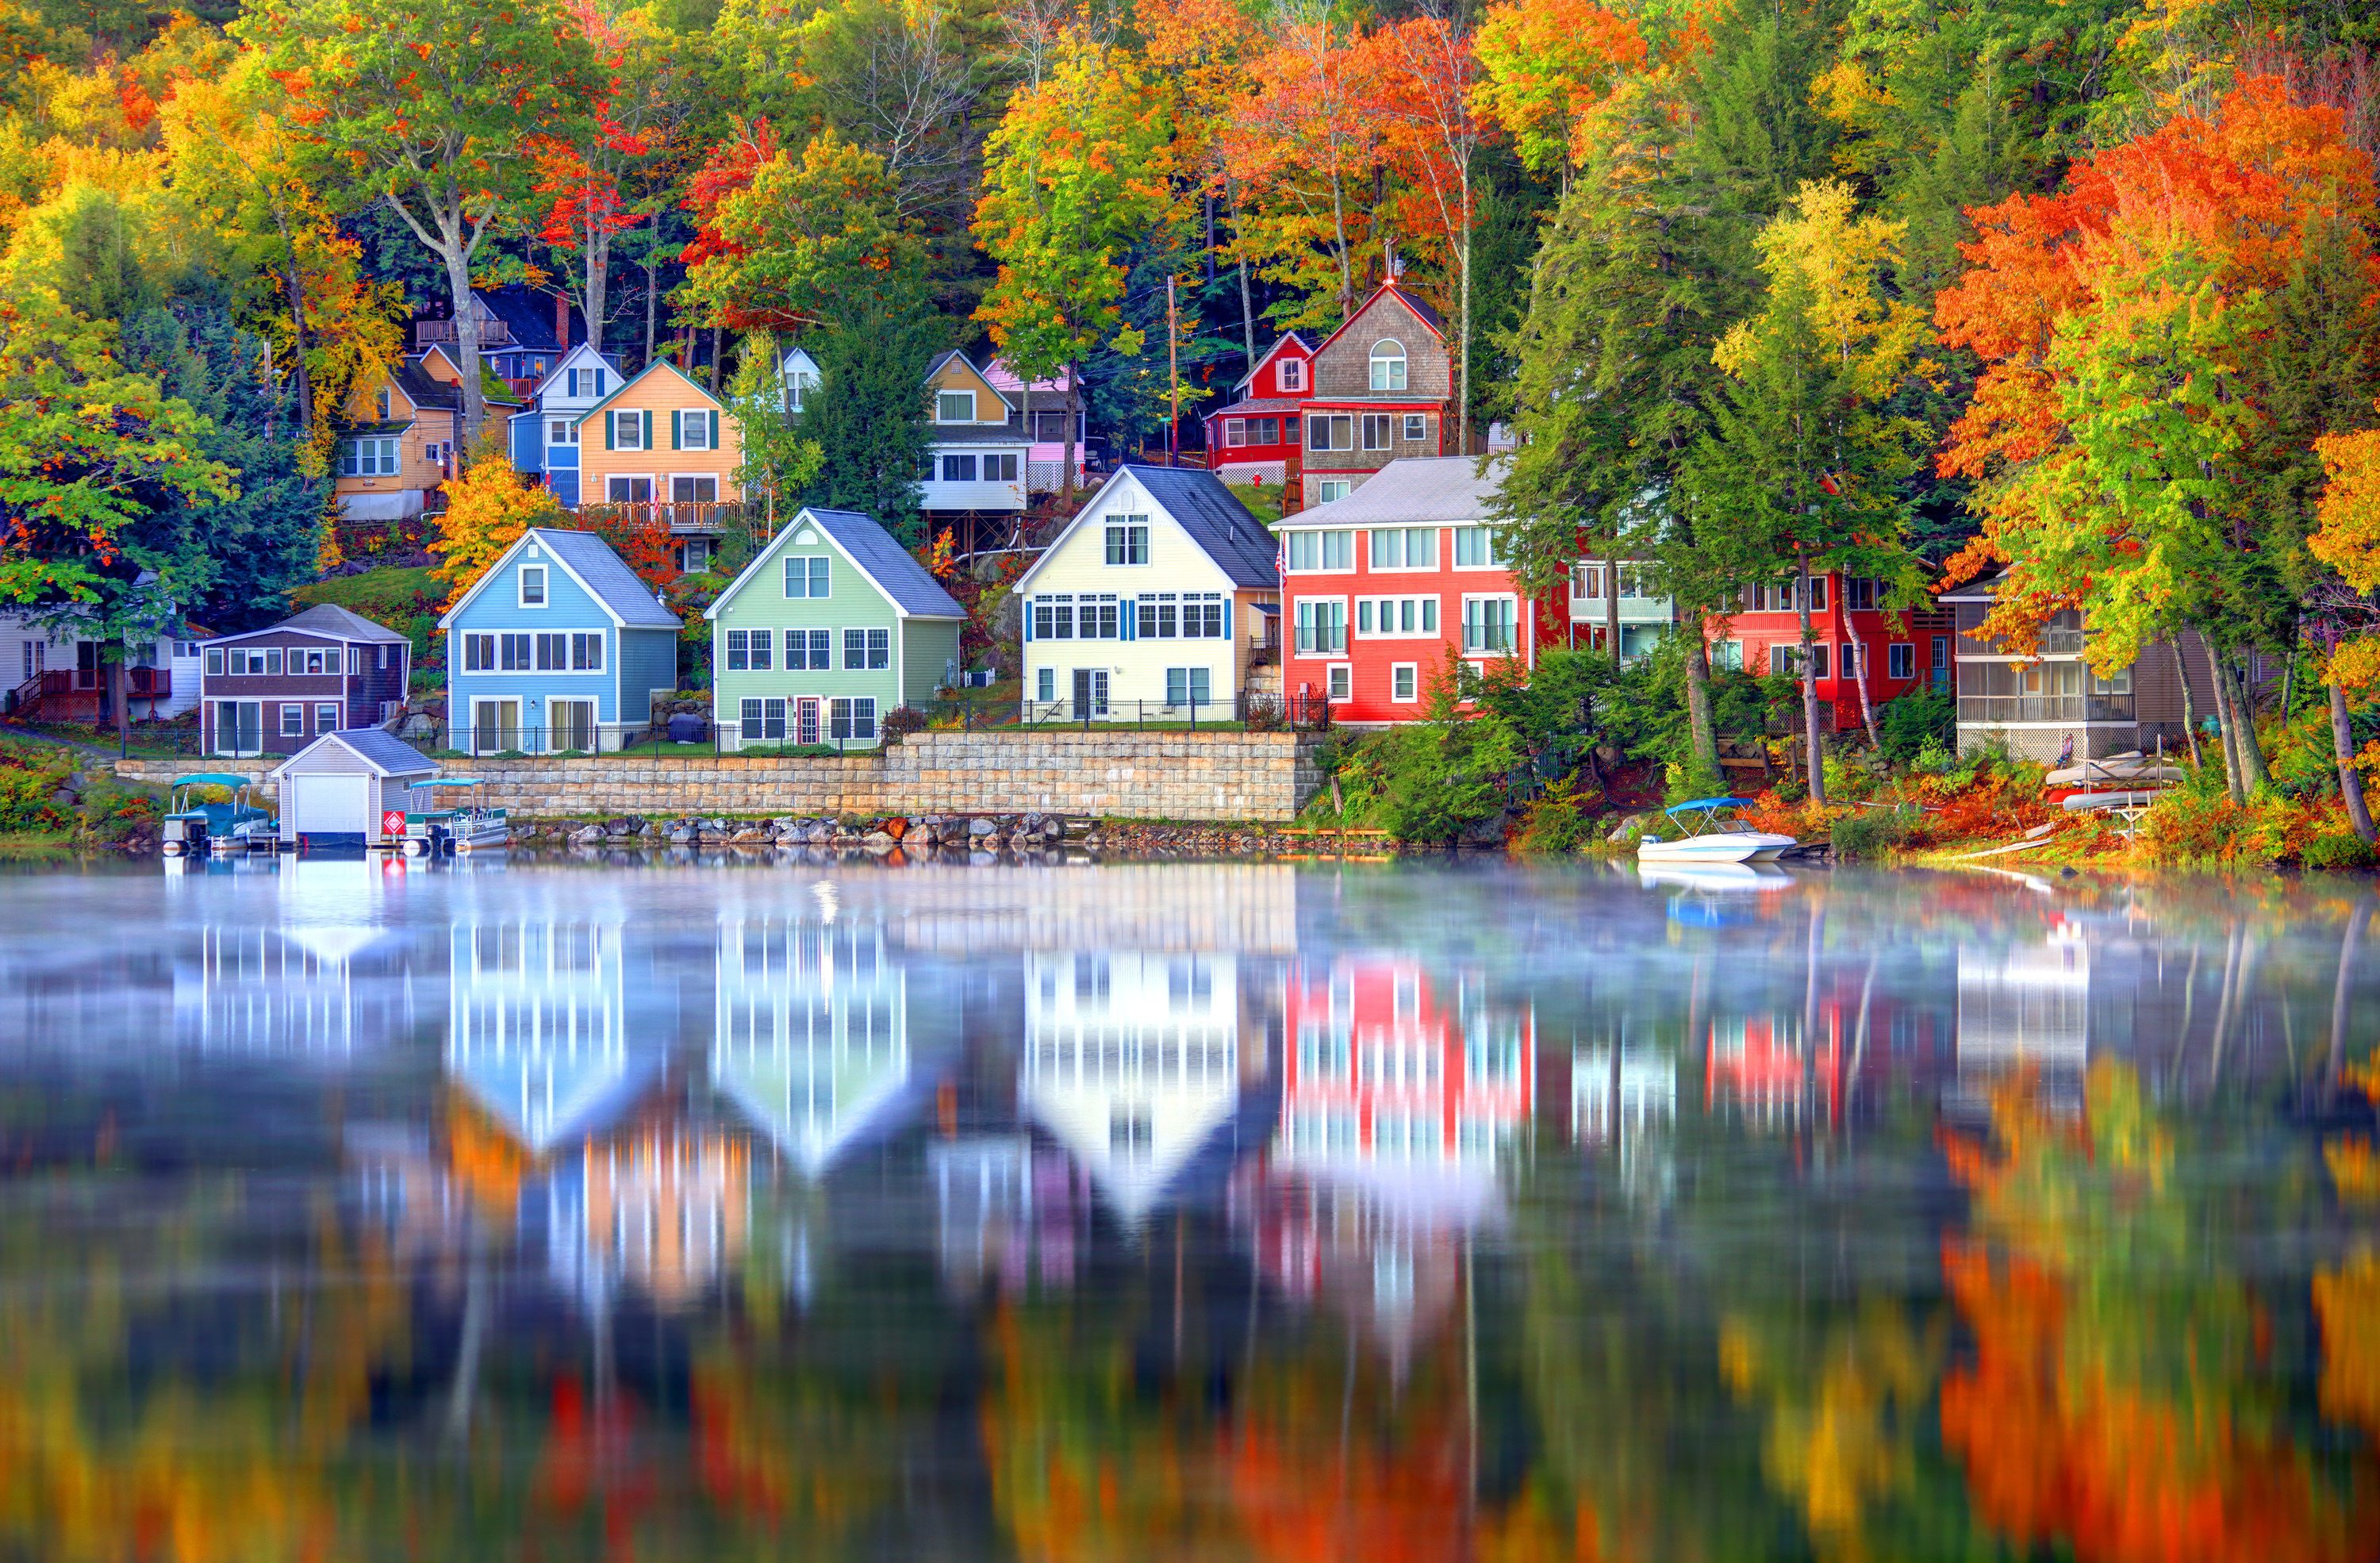 Colorful houses on the water in fall